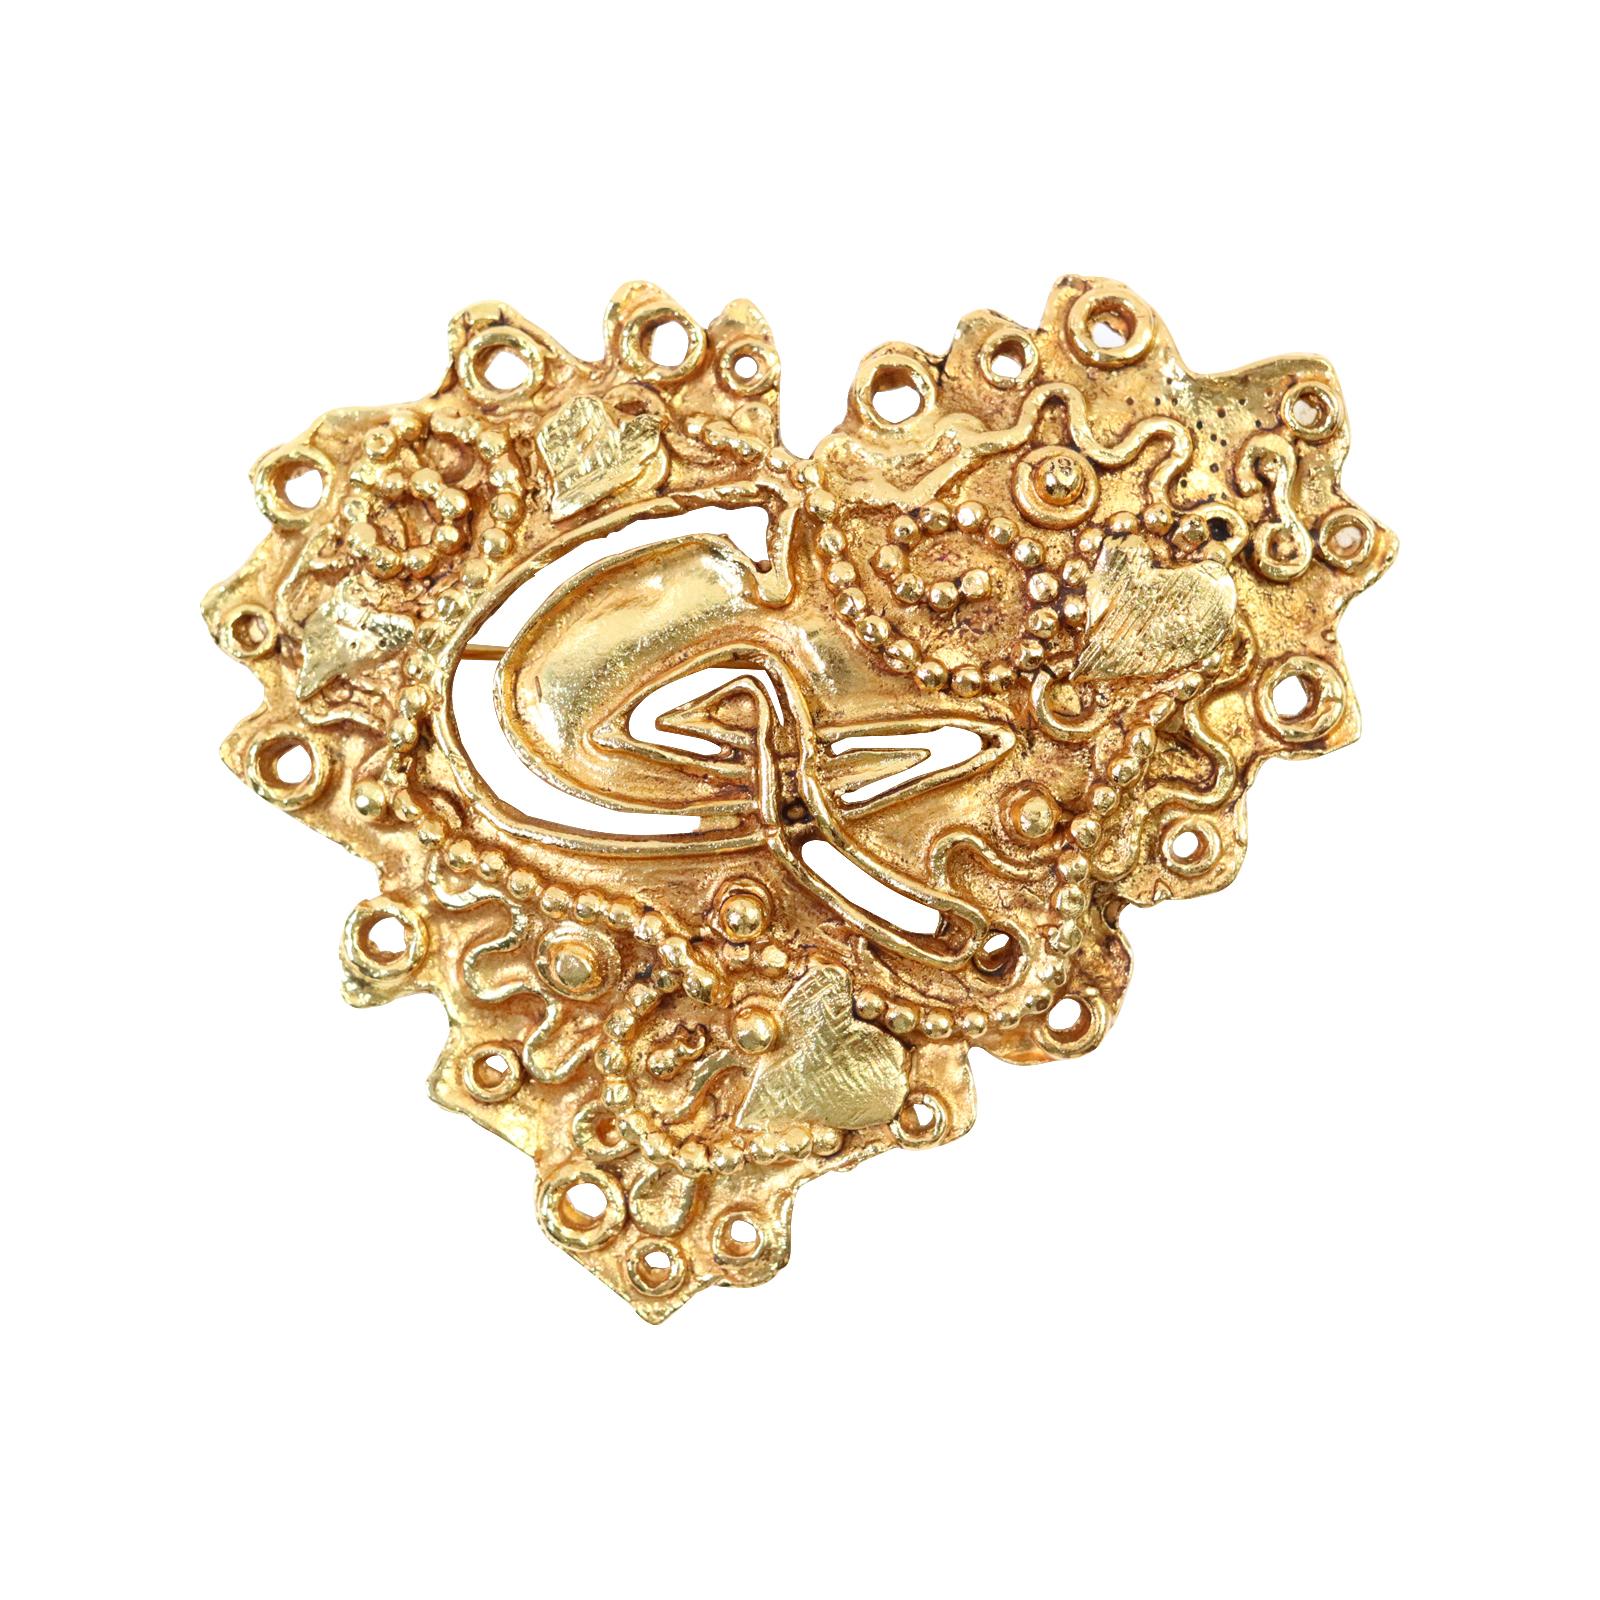 Vintage Christian Lacroix Gold Tone Heart Brooch Circa 1990s For Sale 1